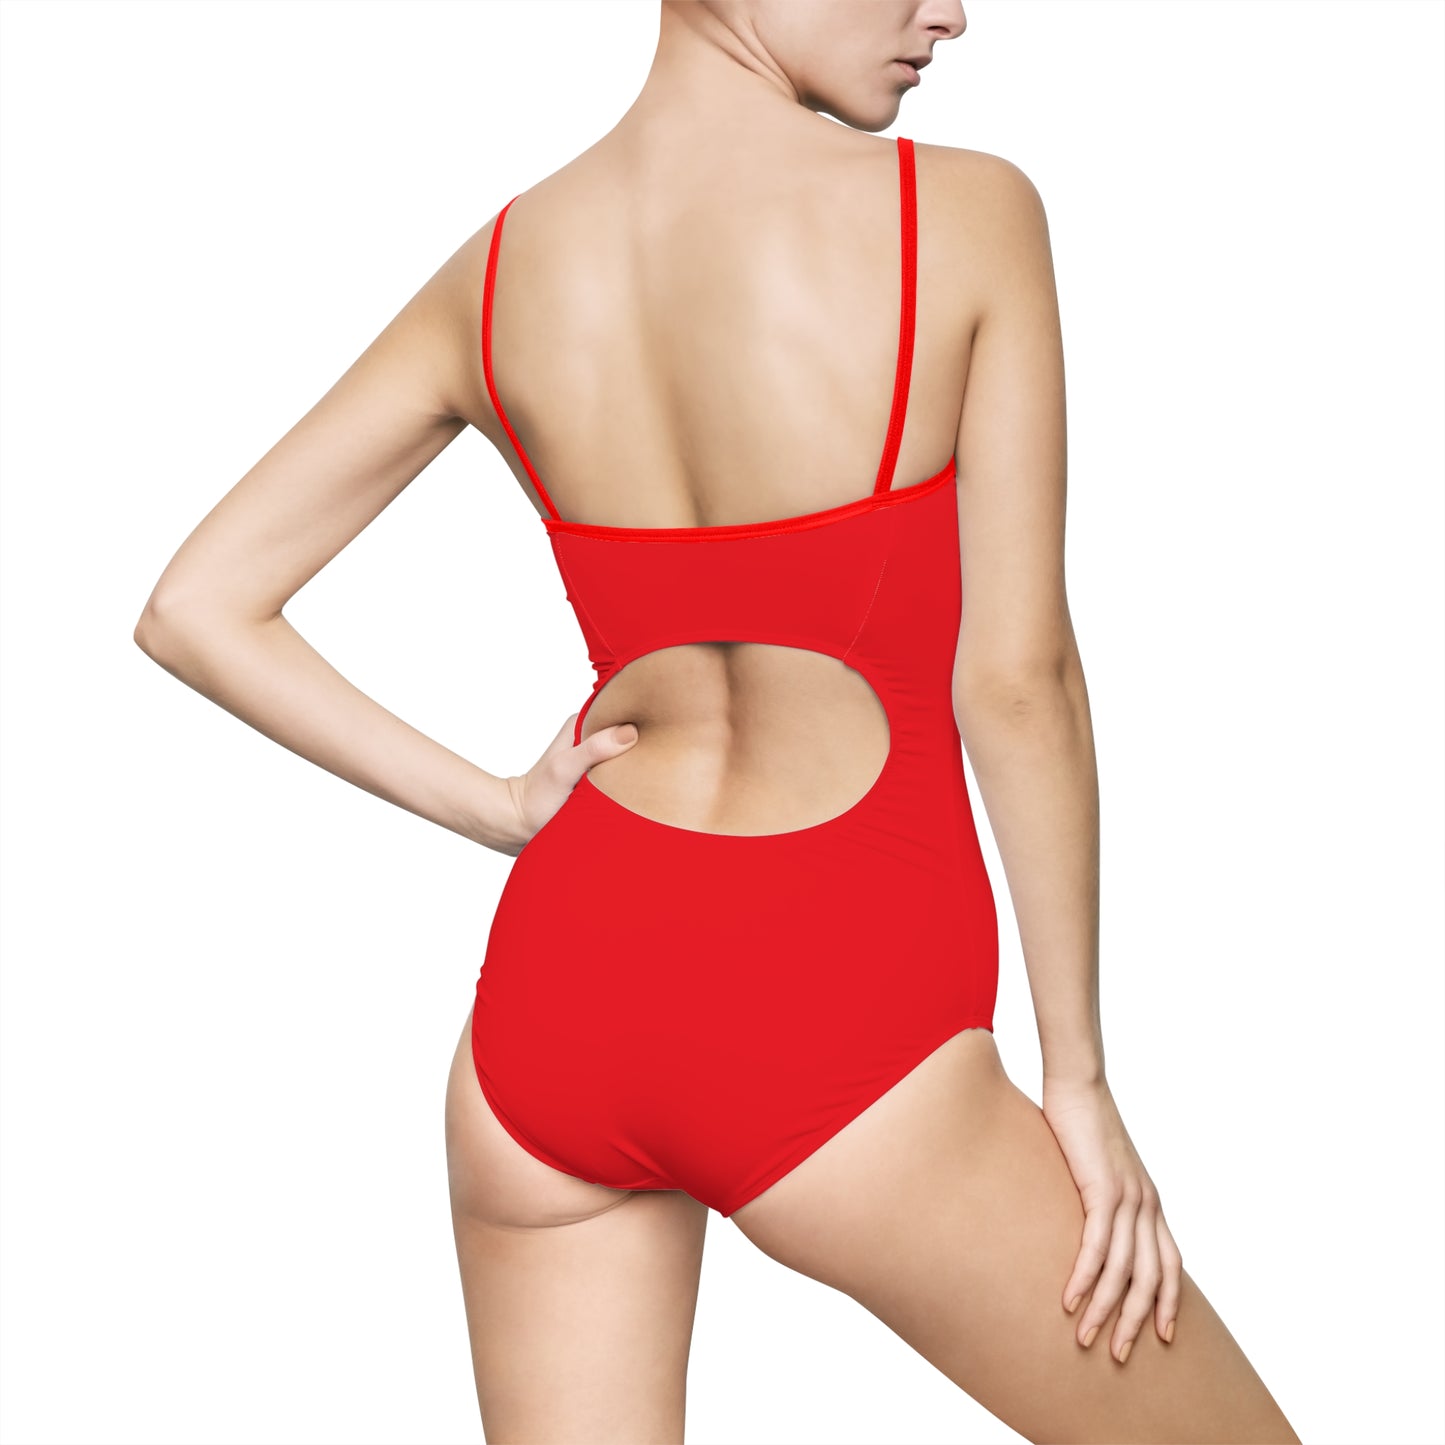 Rep the Y Women's One-piece Swimsuit